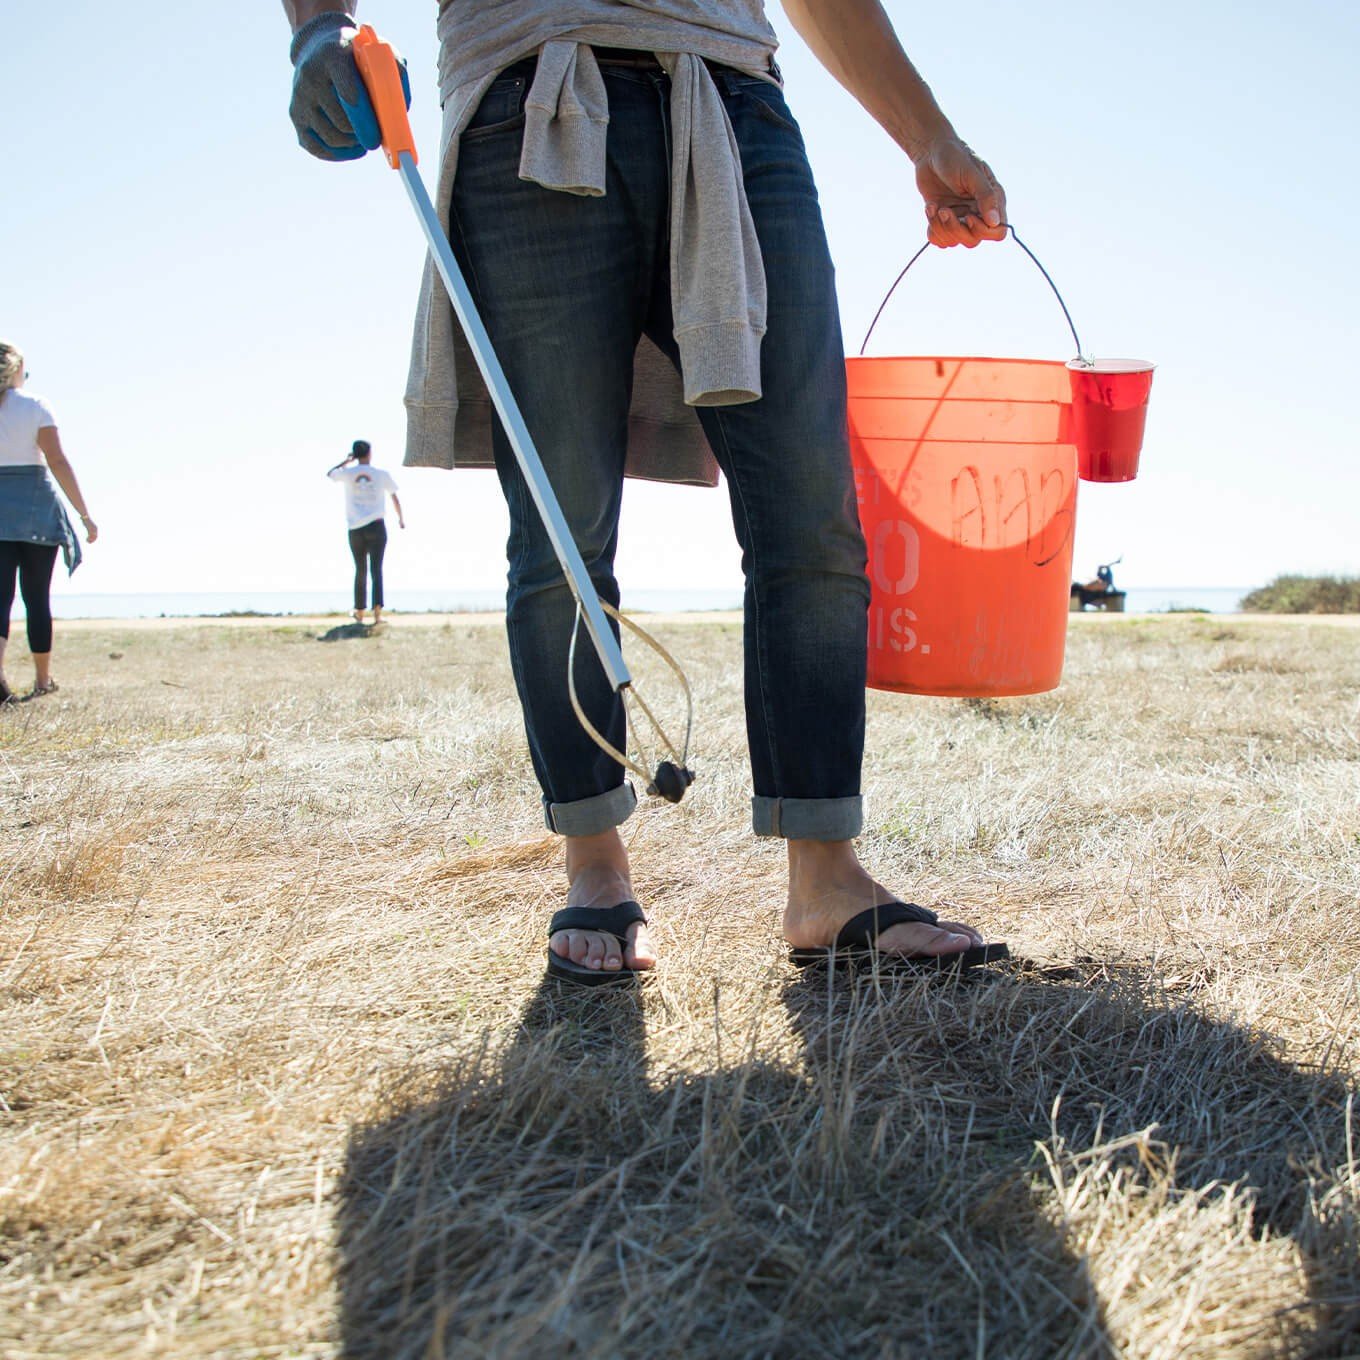 Volunteer with a grabber tool and bucket picks up trash on the beach.